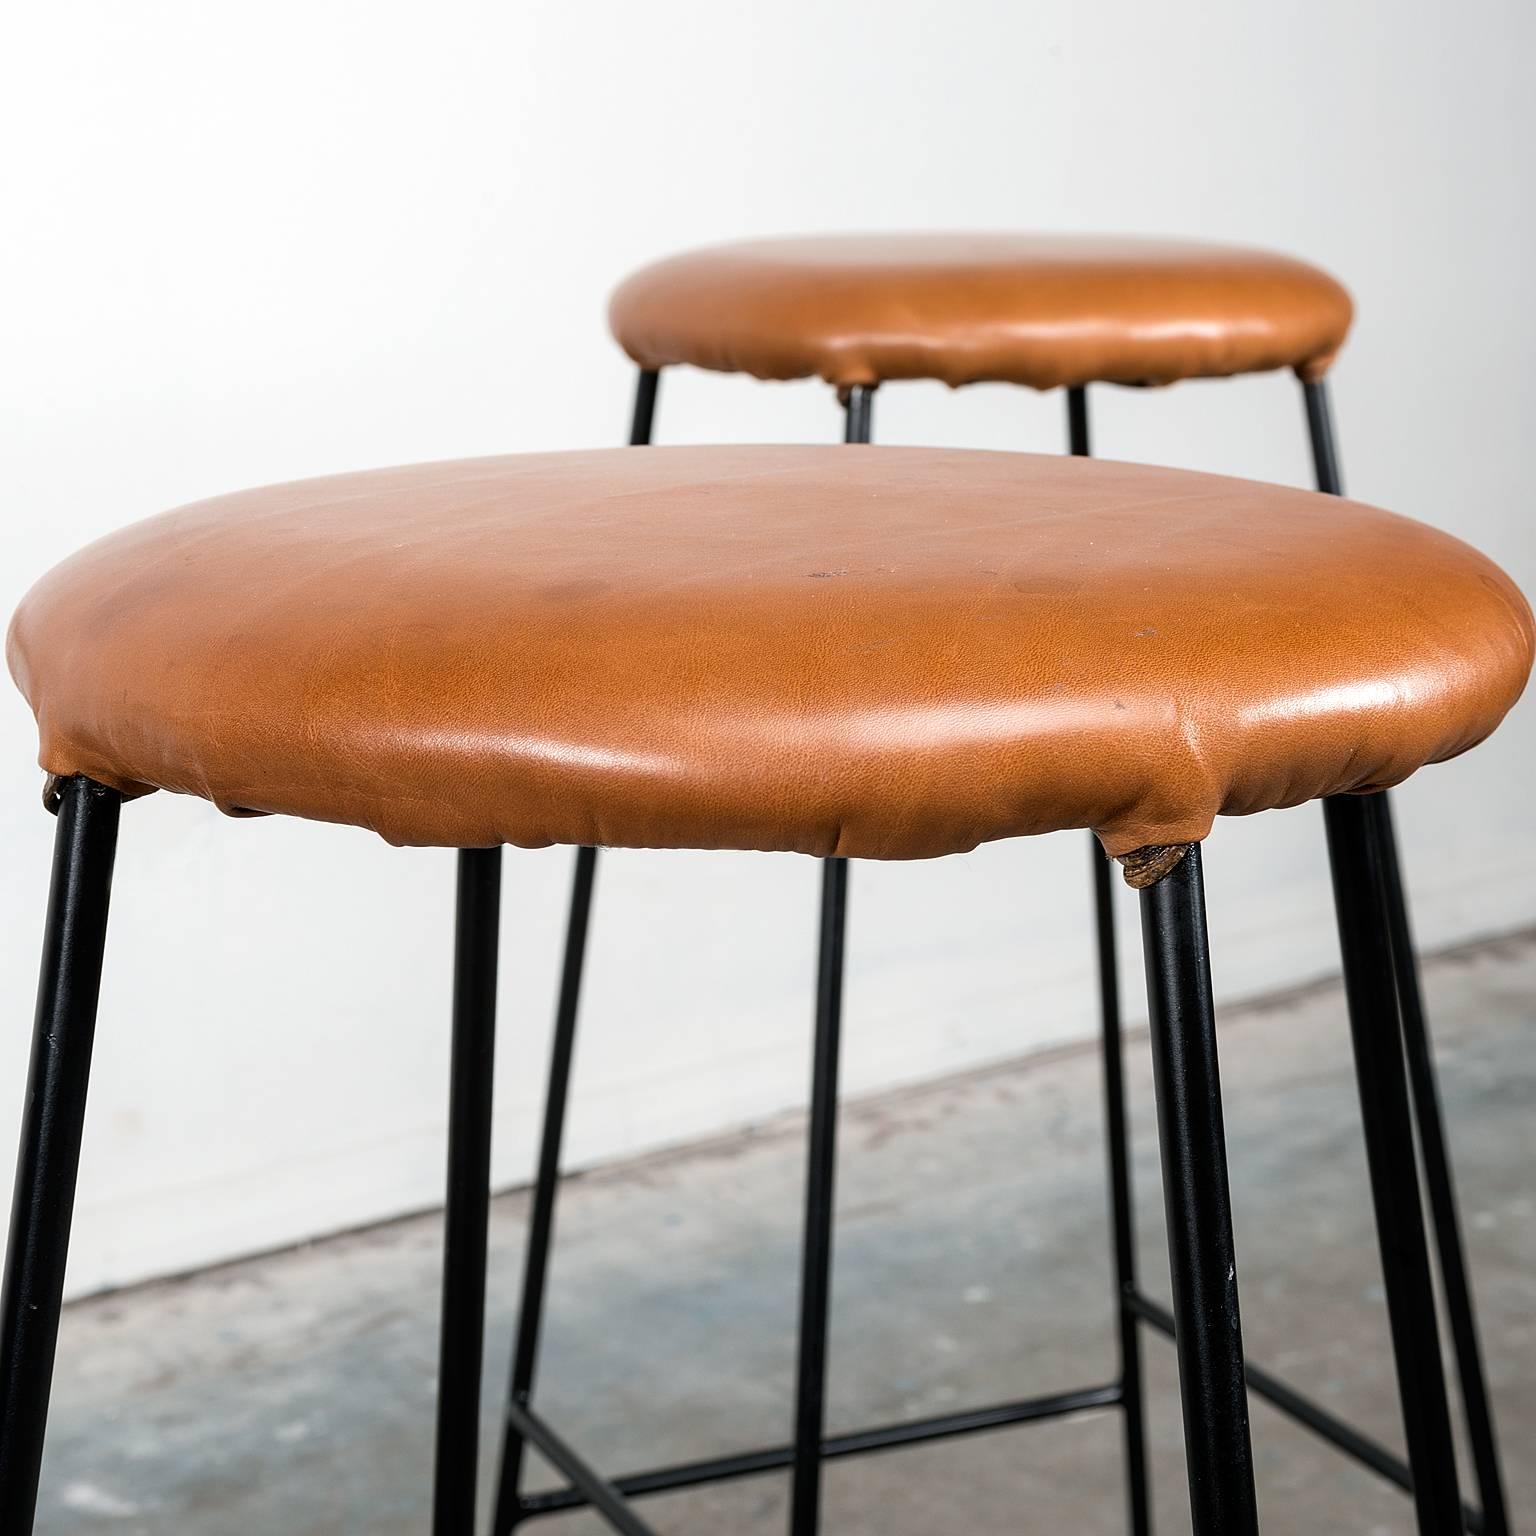 Mid-20th Century Set of Four Iron Barstools with Caramel Leather Seats, 1960s